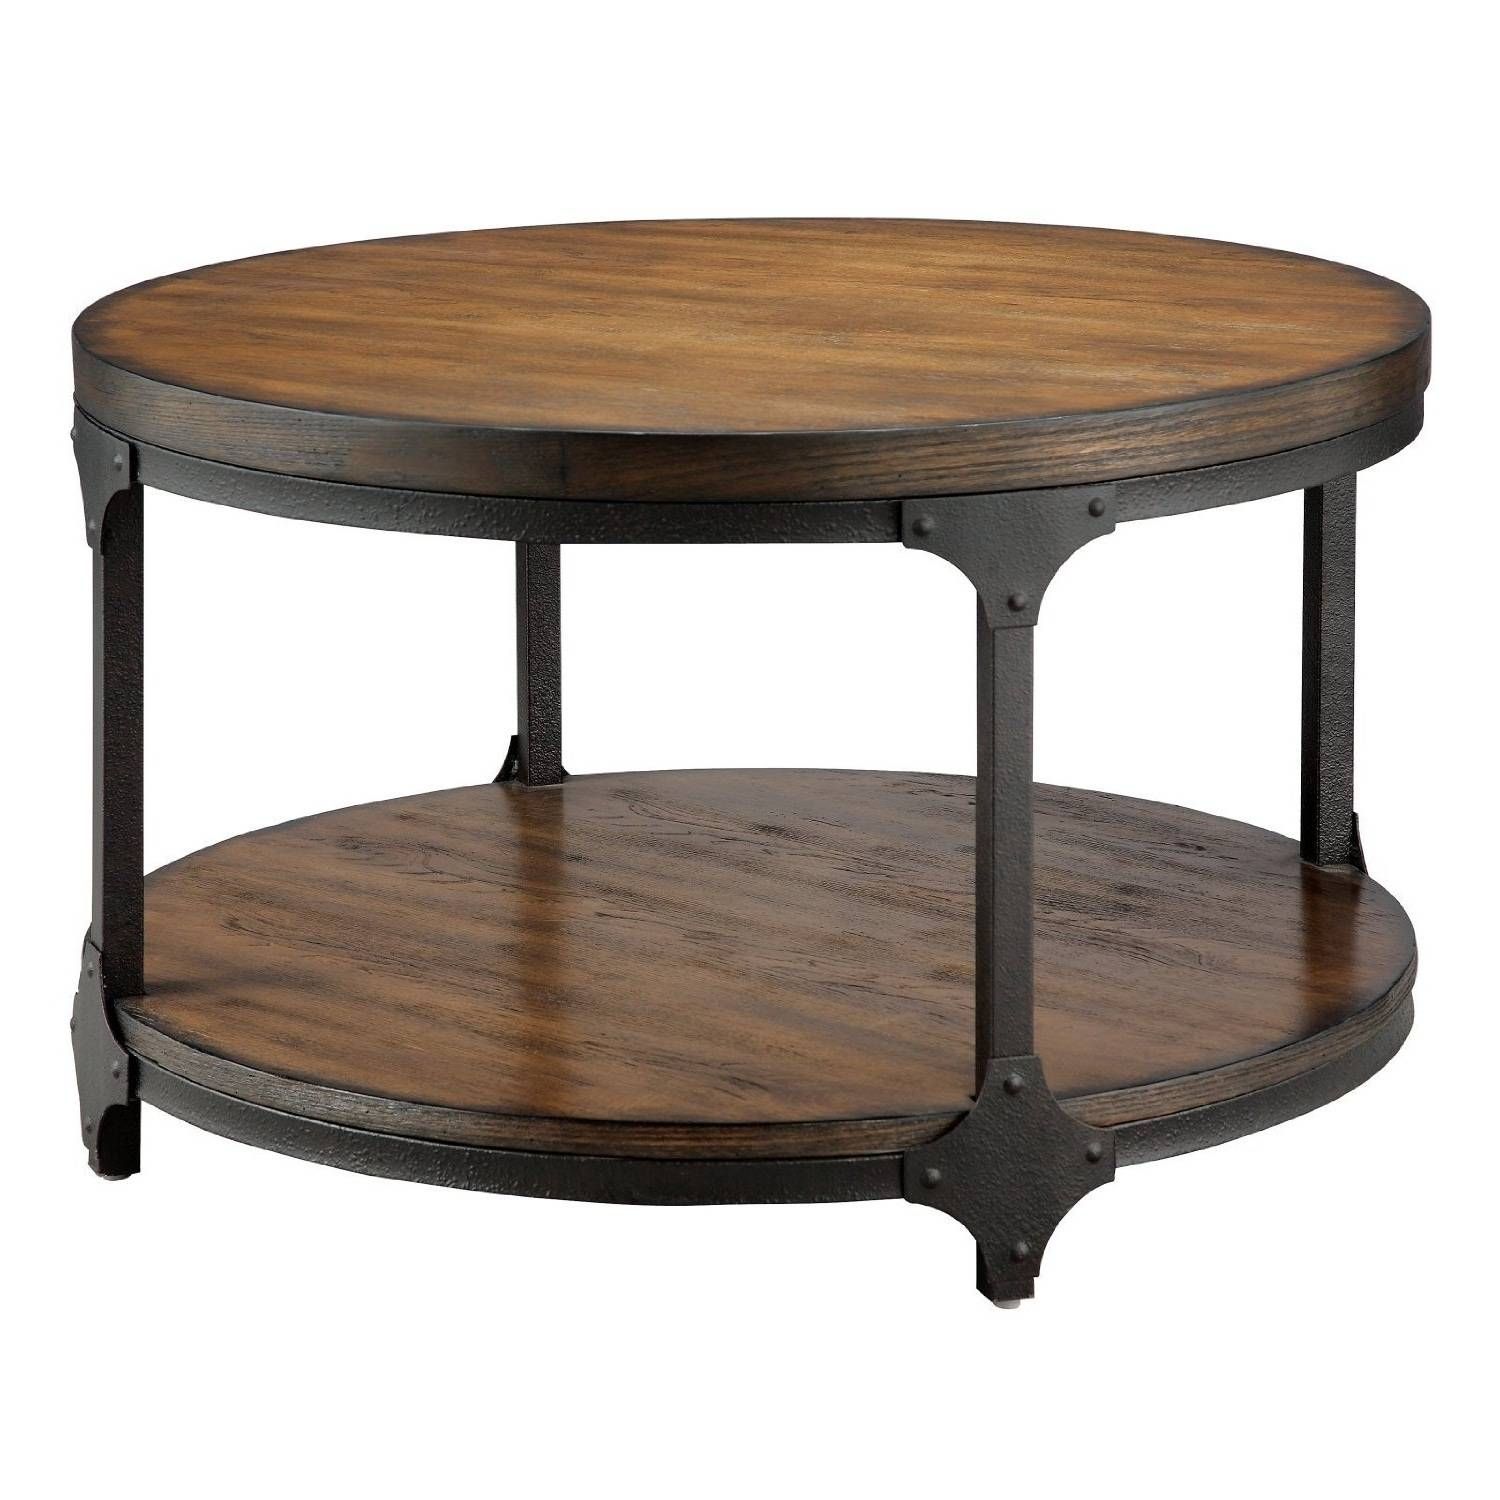 Round Coffee Table Wood Metal | Coffee Tables Decoration With Round Glass And Wood Coffee Tables (View 14 of 30)